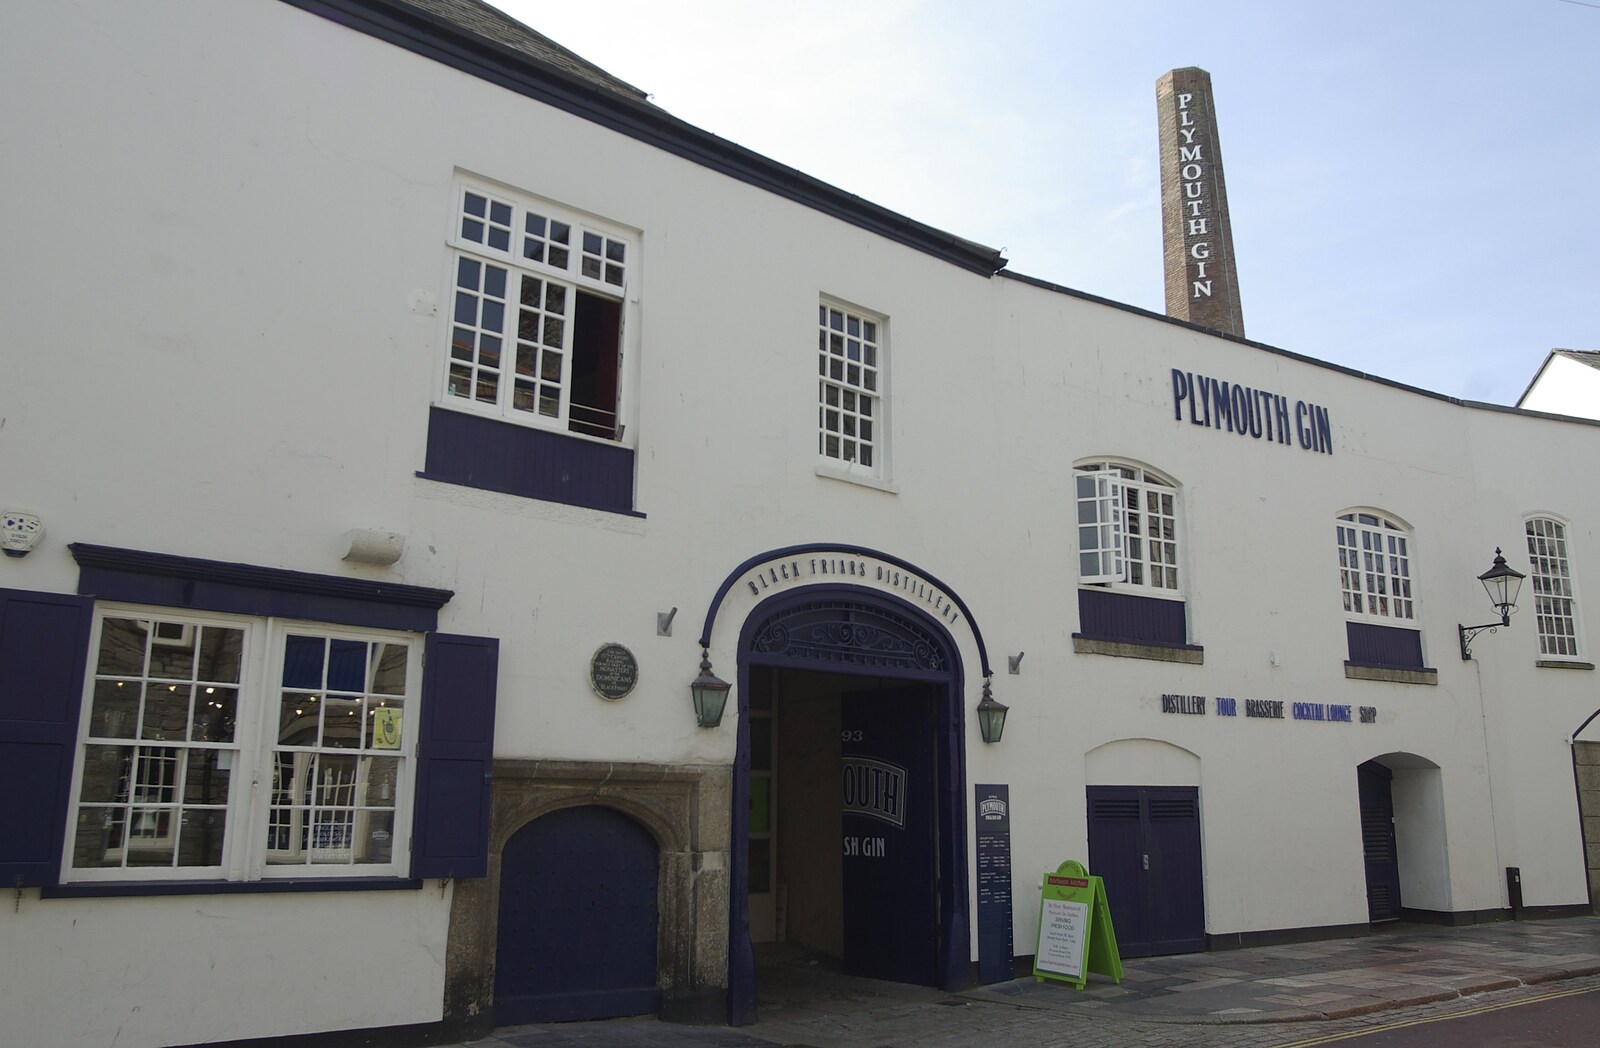 The Plymouth Gin Distillery, once a student haunt from A Trip to The Barbican, Plymouth, Devon - 6th April 2007